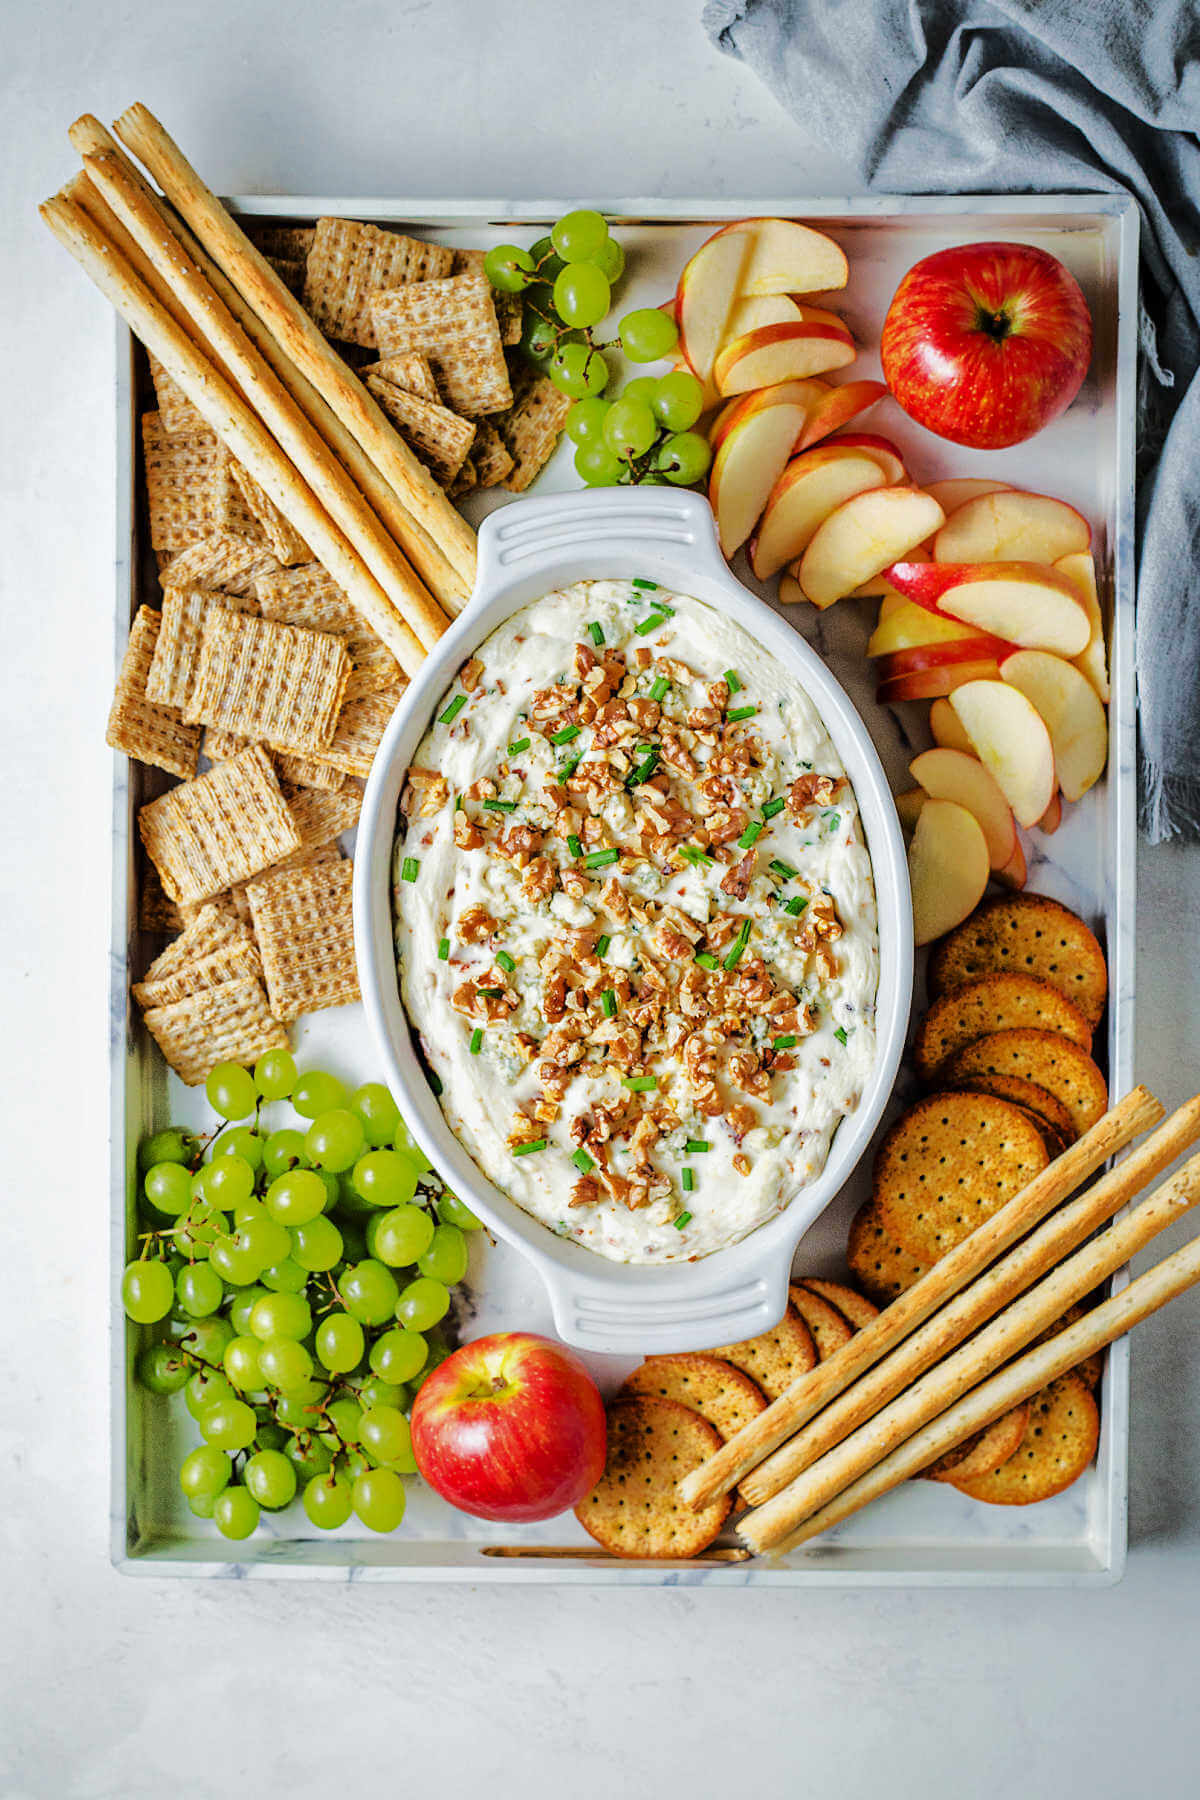 blue cheese dip with bacon, chives and walnuts on a tray arranged with bread sticks, assorted crackers, apple slices and grape clusters on a table.